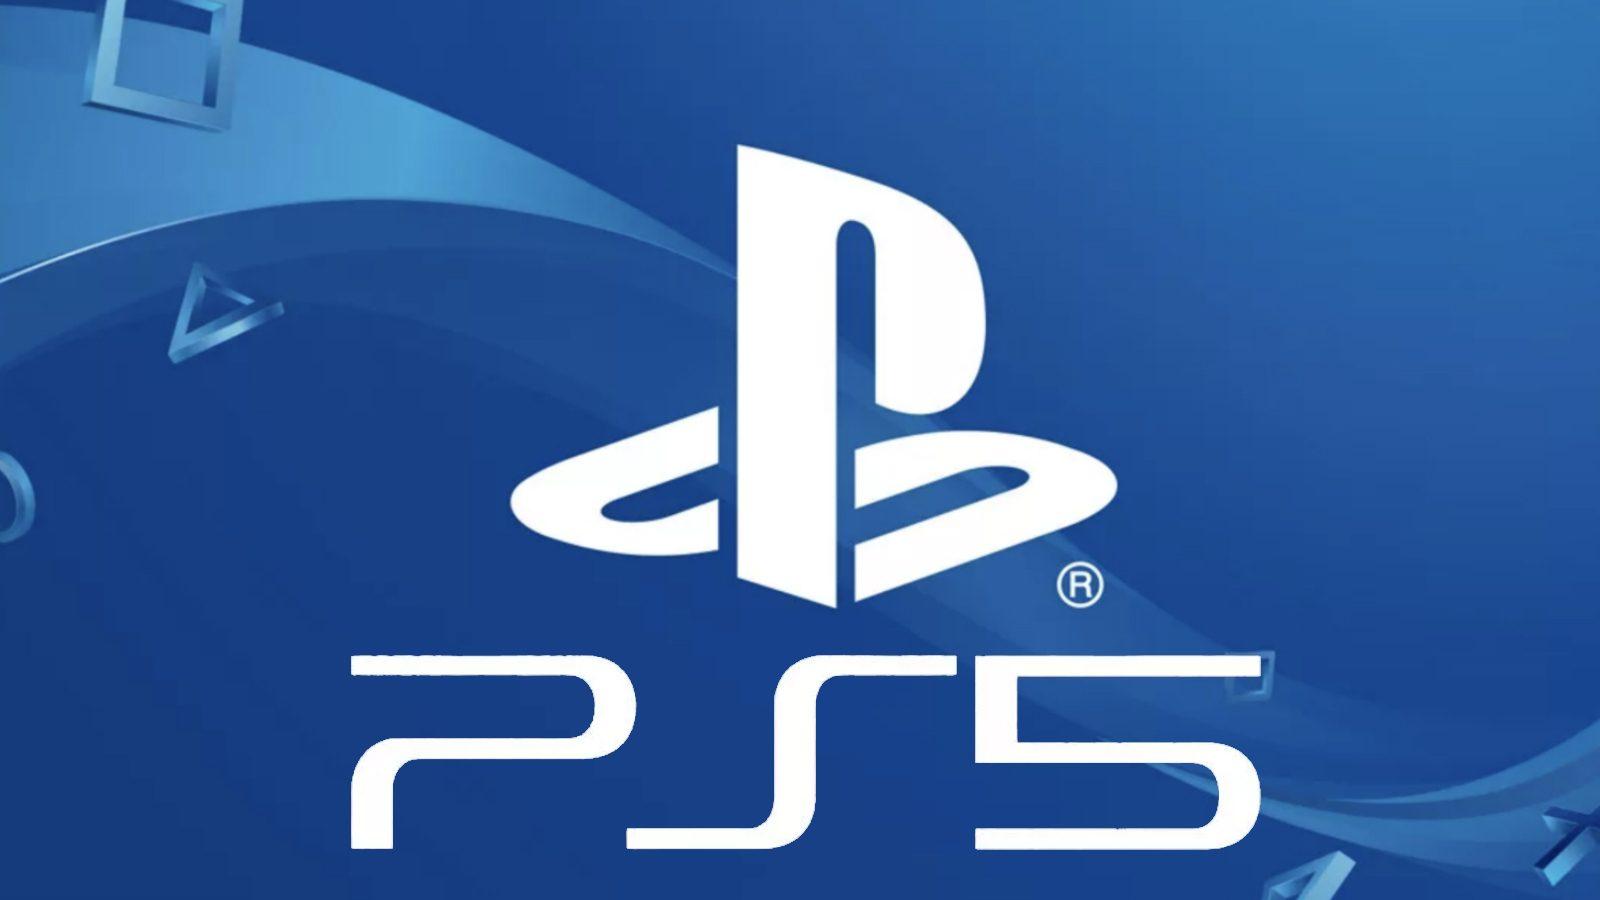 Where to buy PS5 Slim: Price, features, availability and more - Dexerto